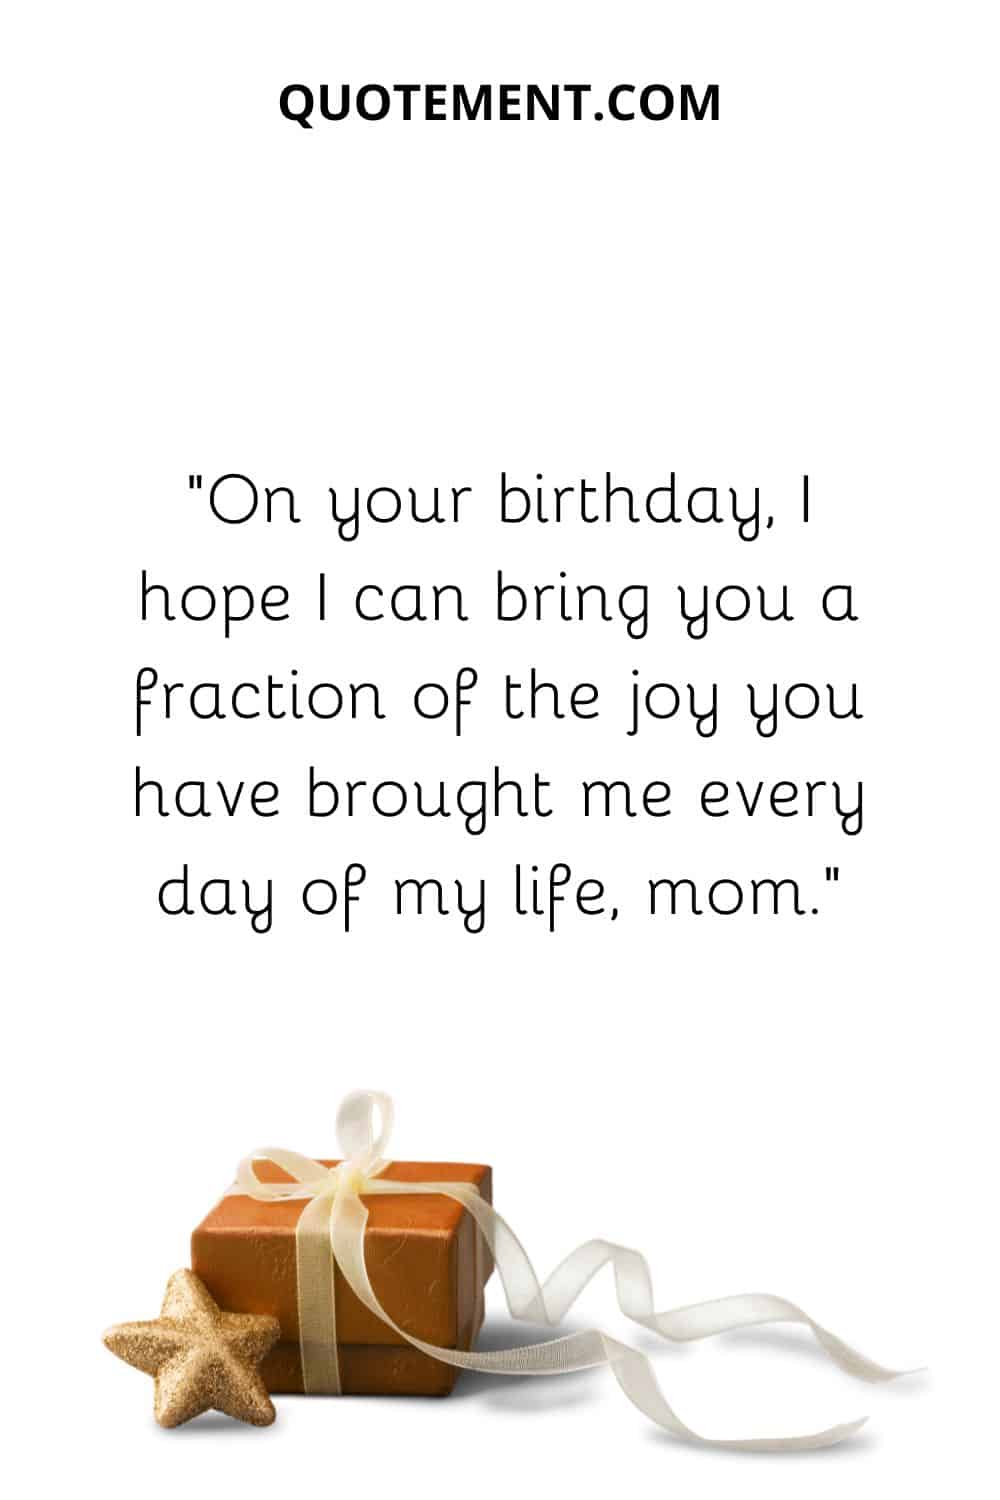 On your birthday, I hope I can bring you a fraction of the joy you have brought me every day of my life, mom